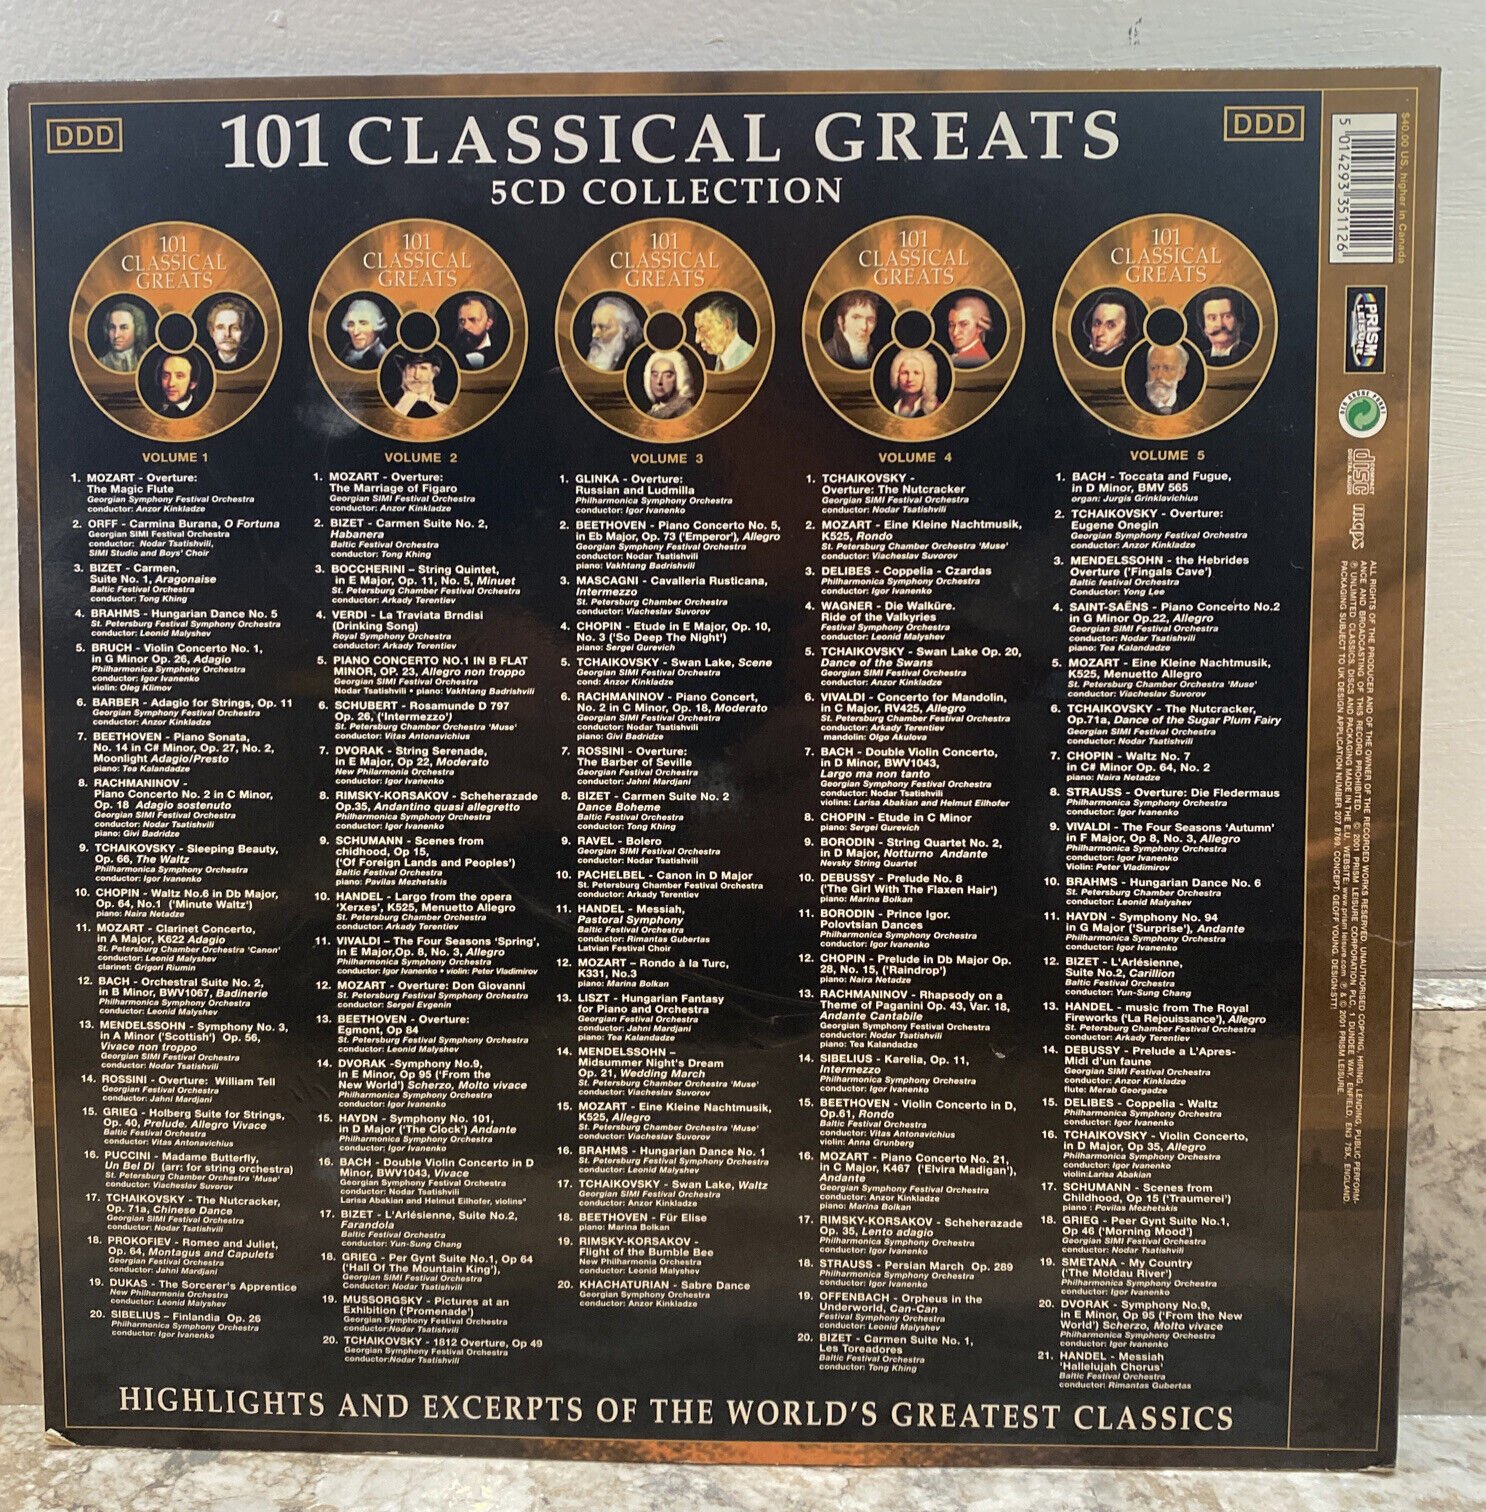 Various - 101 Classical Greats: 5 CD Collection - 6 Hours 20 BIT Recordings  DDD 5014293351126 | eBay